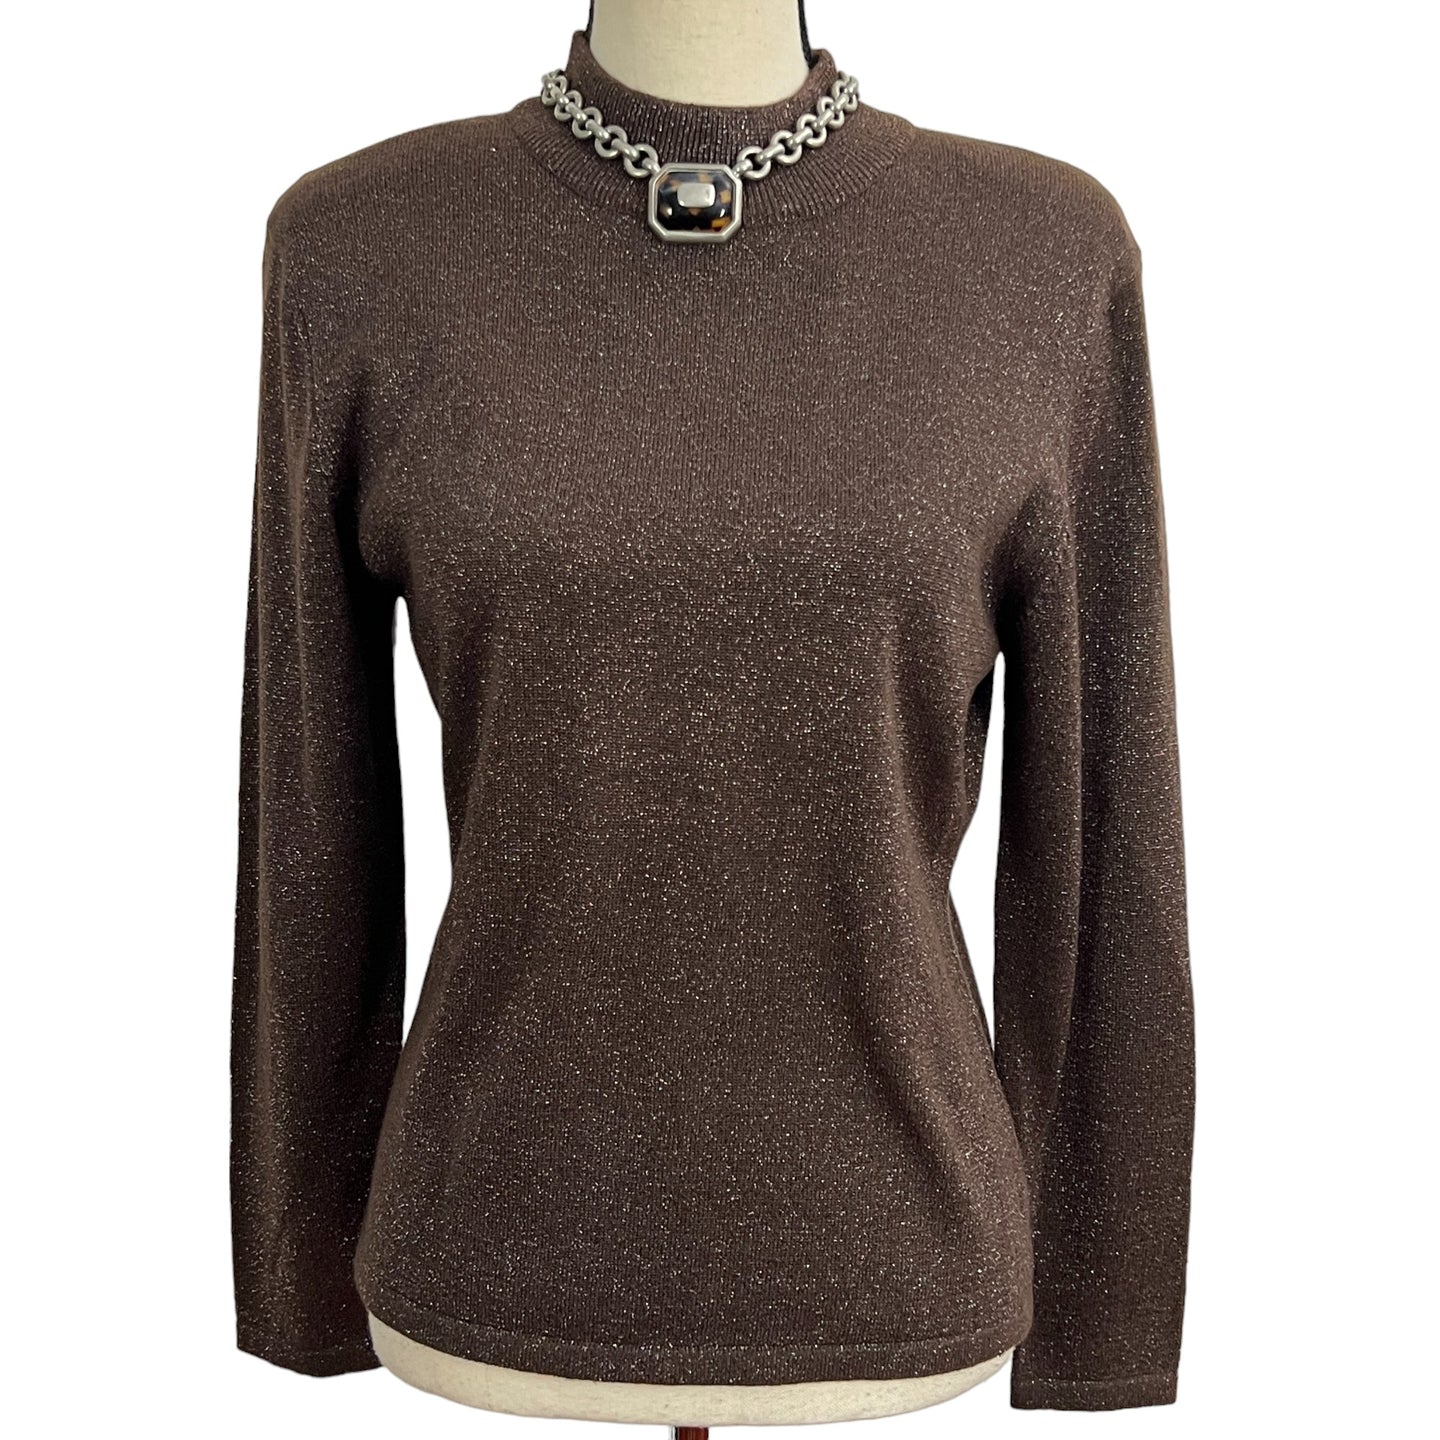 Vintage Brown Metallic Cowl Neck Sweater Size Small